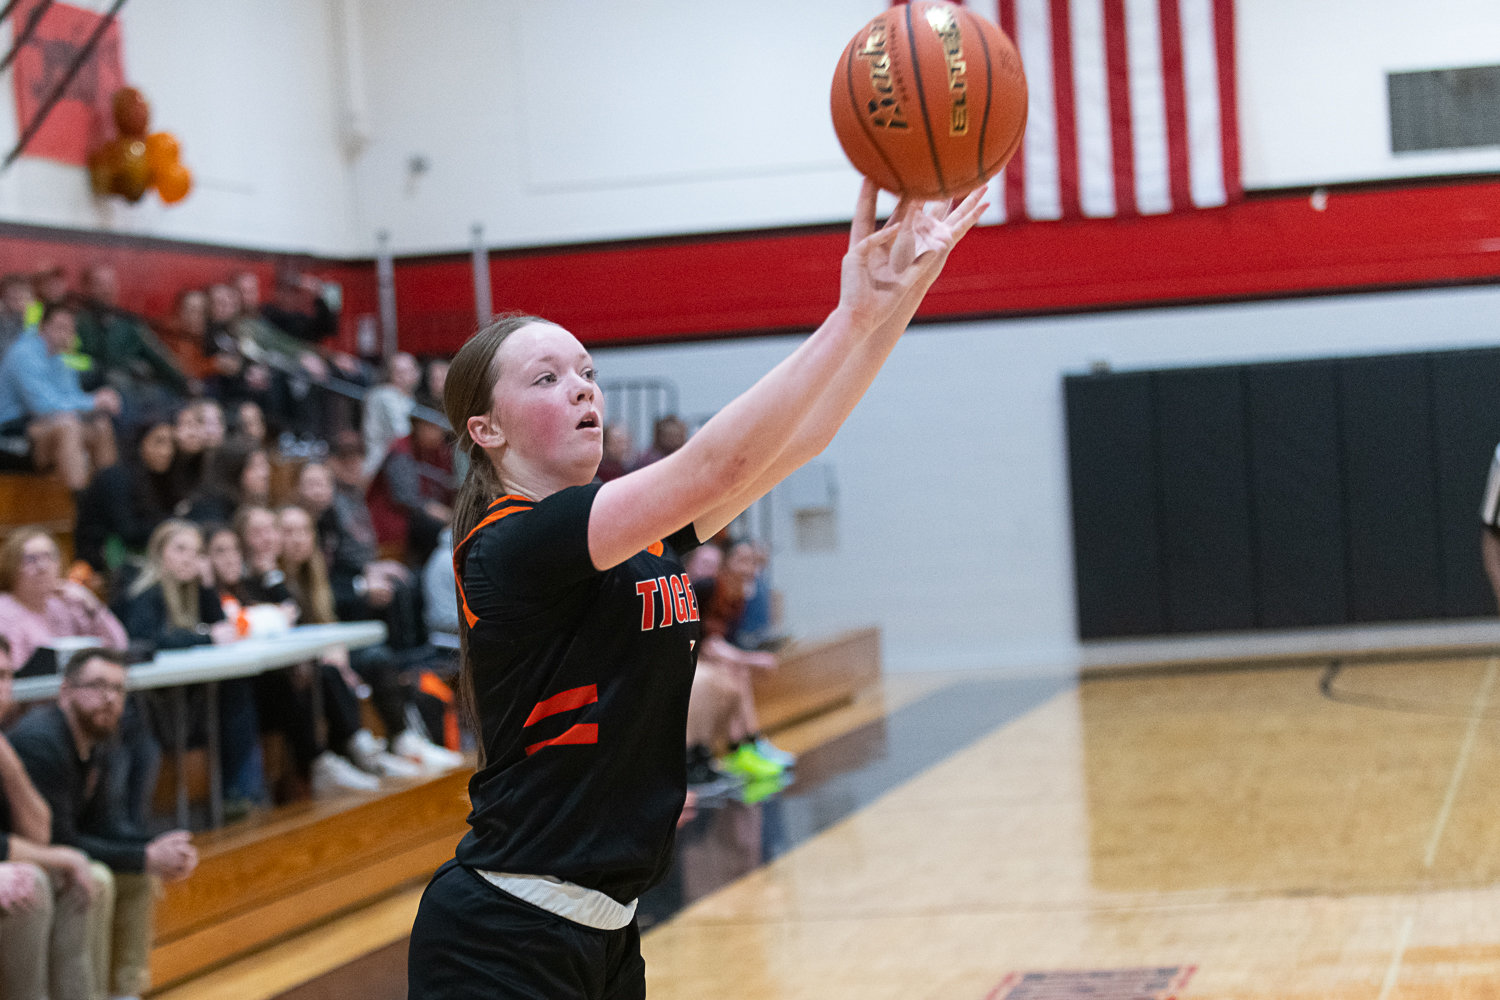 Brooklyn Sprague fires from deep during the second quarter of Centralia's 56-16 win over Tenino on Dec. 1